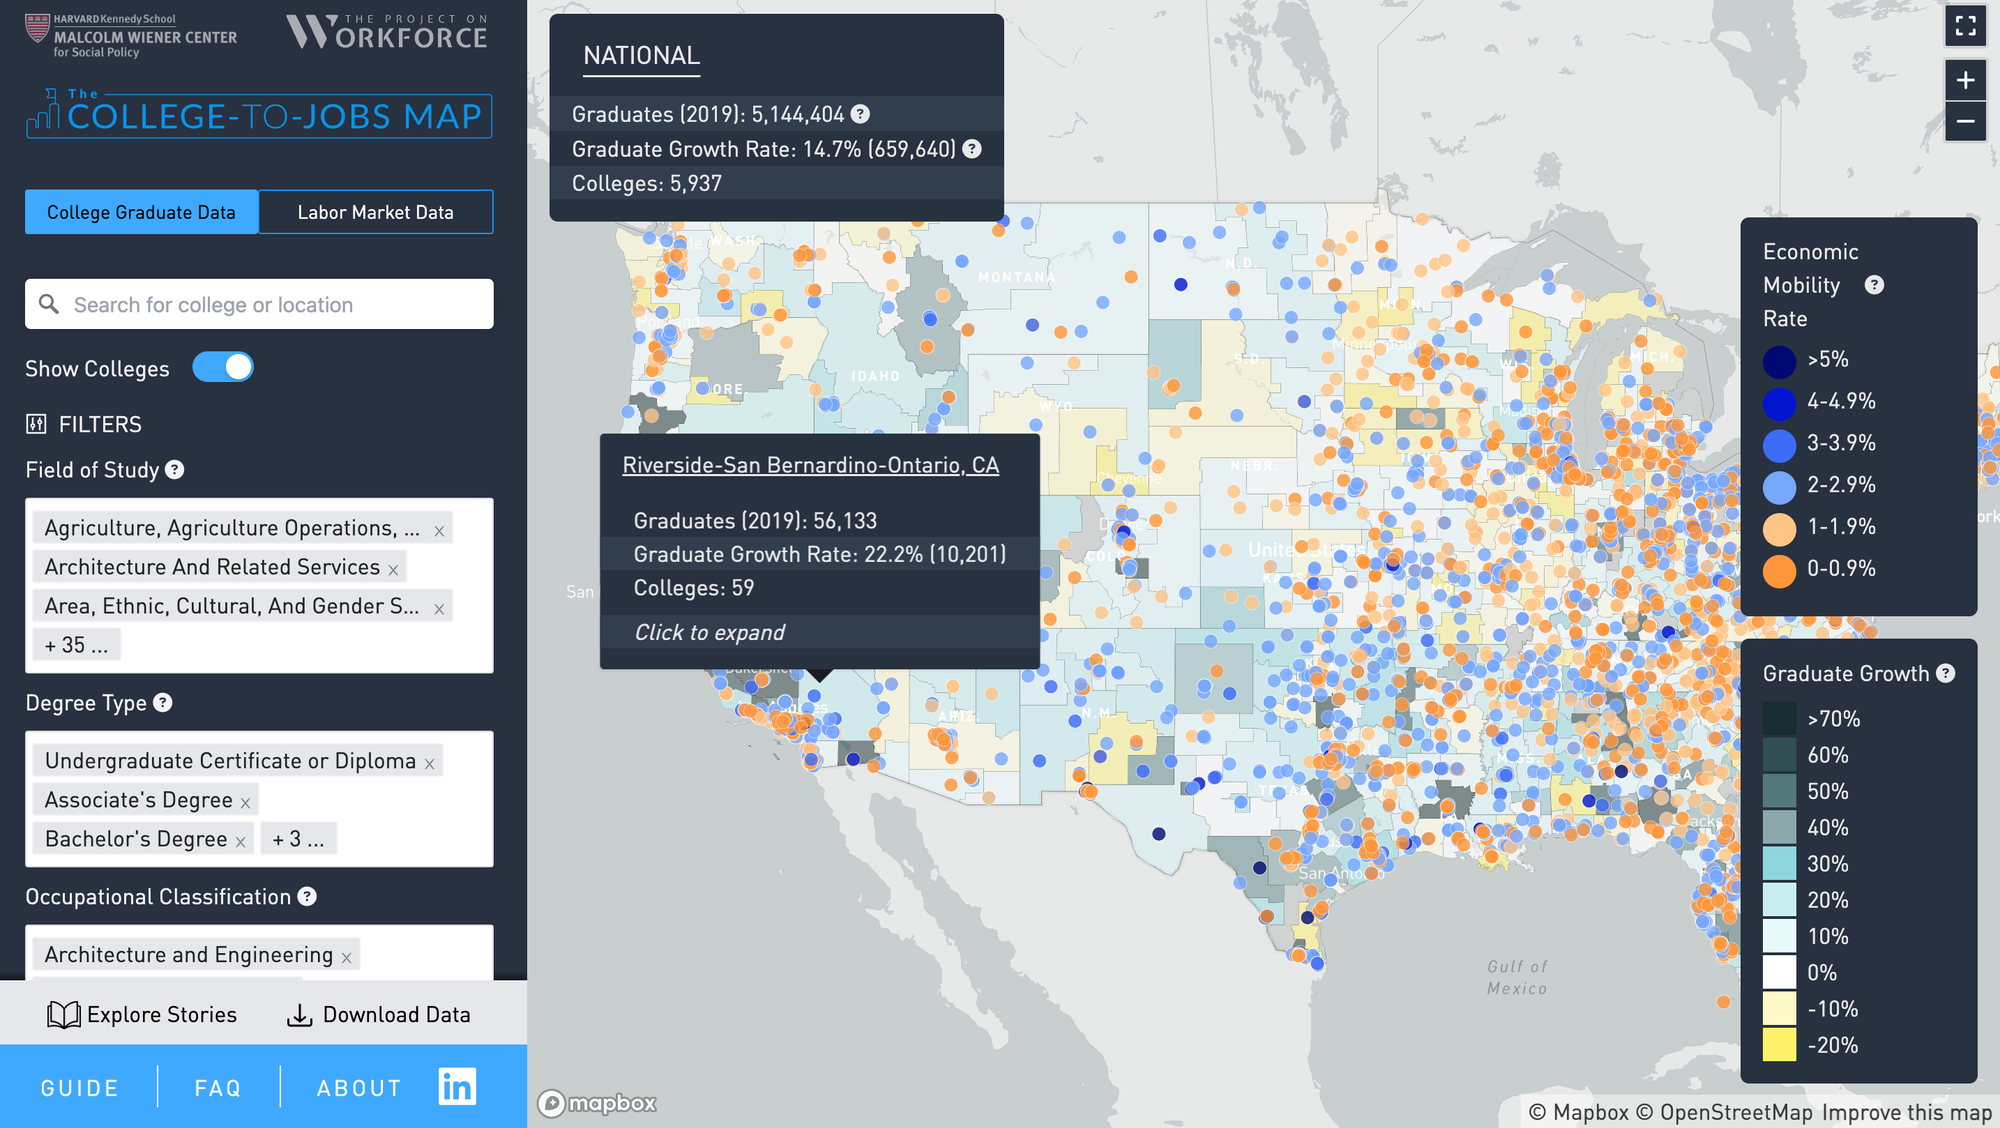 College-to-Job Map Shows Skill Movements Across Space